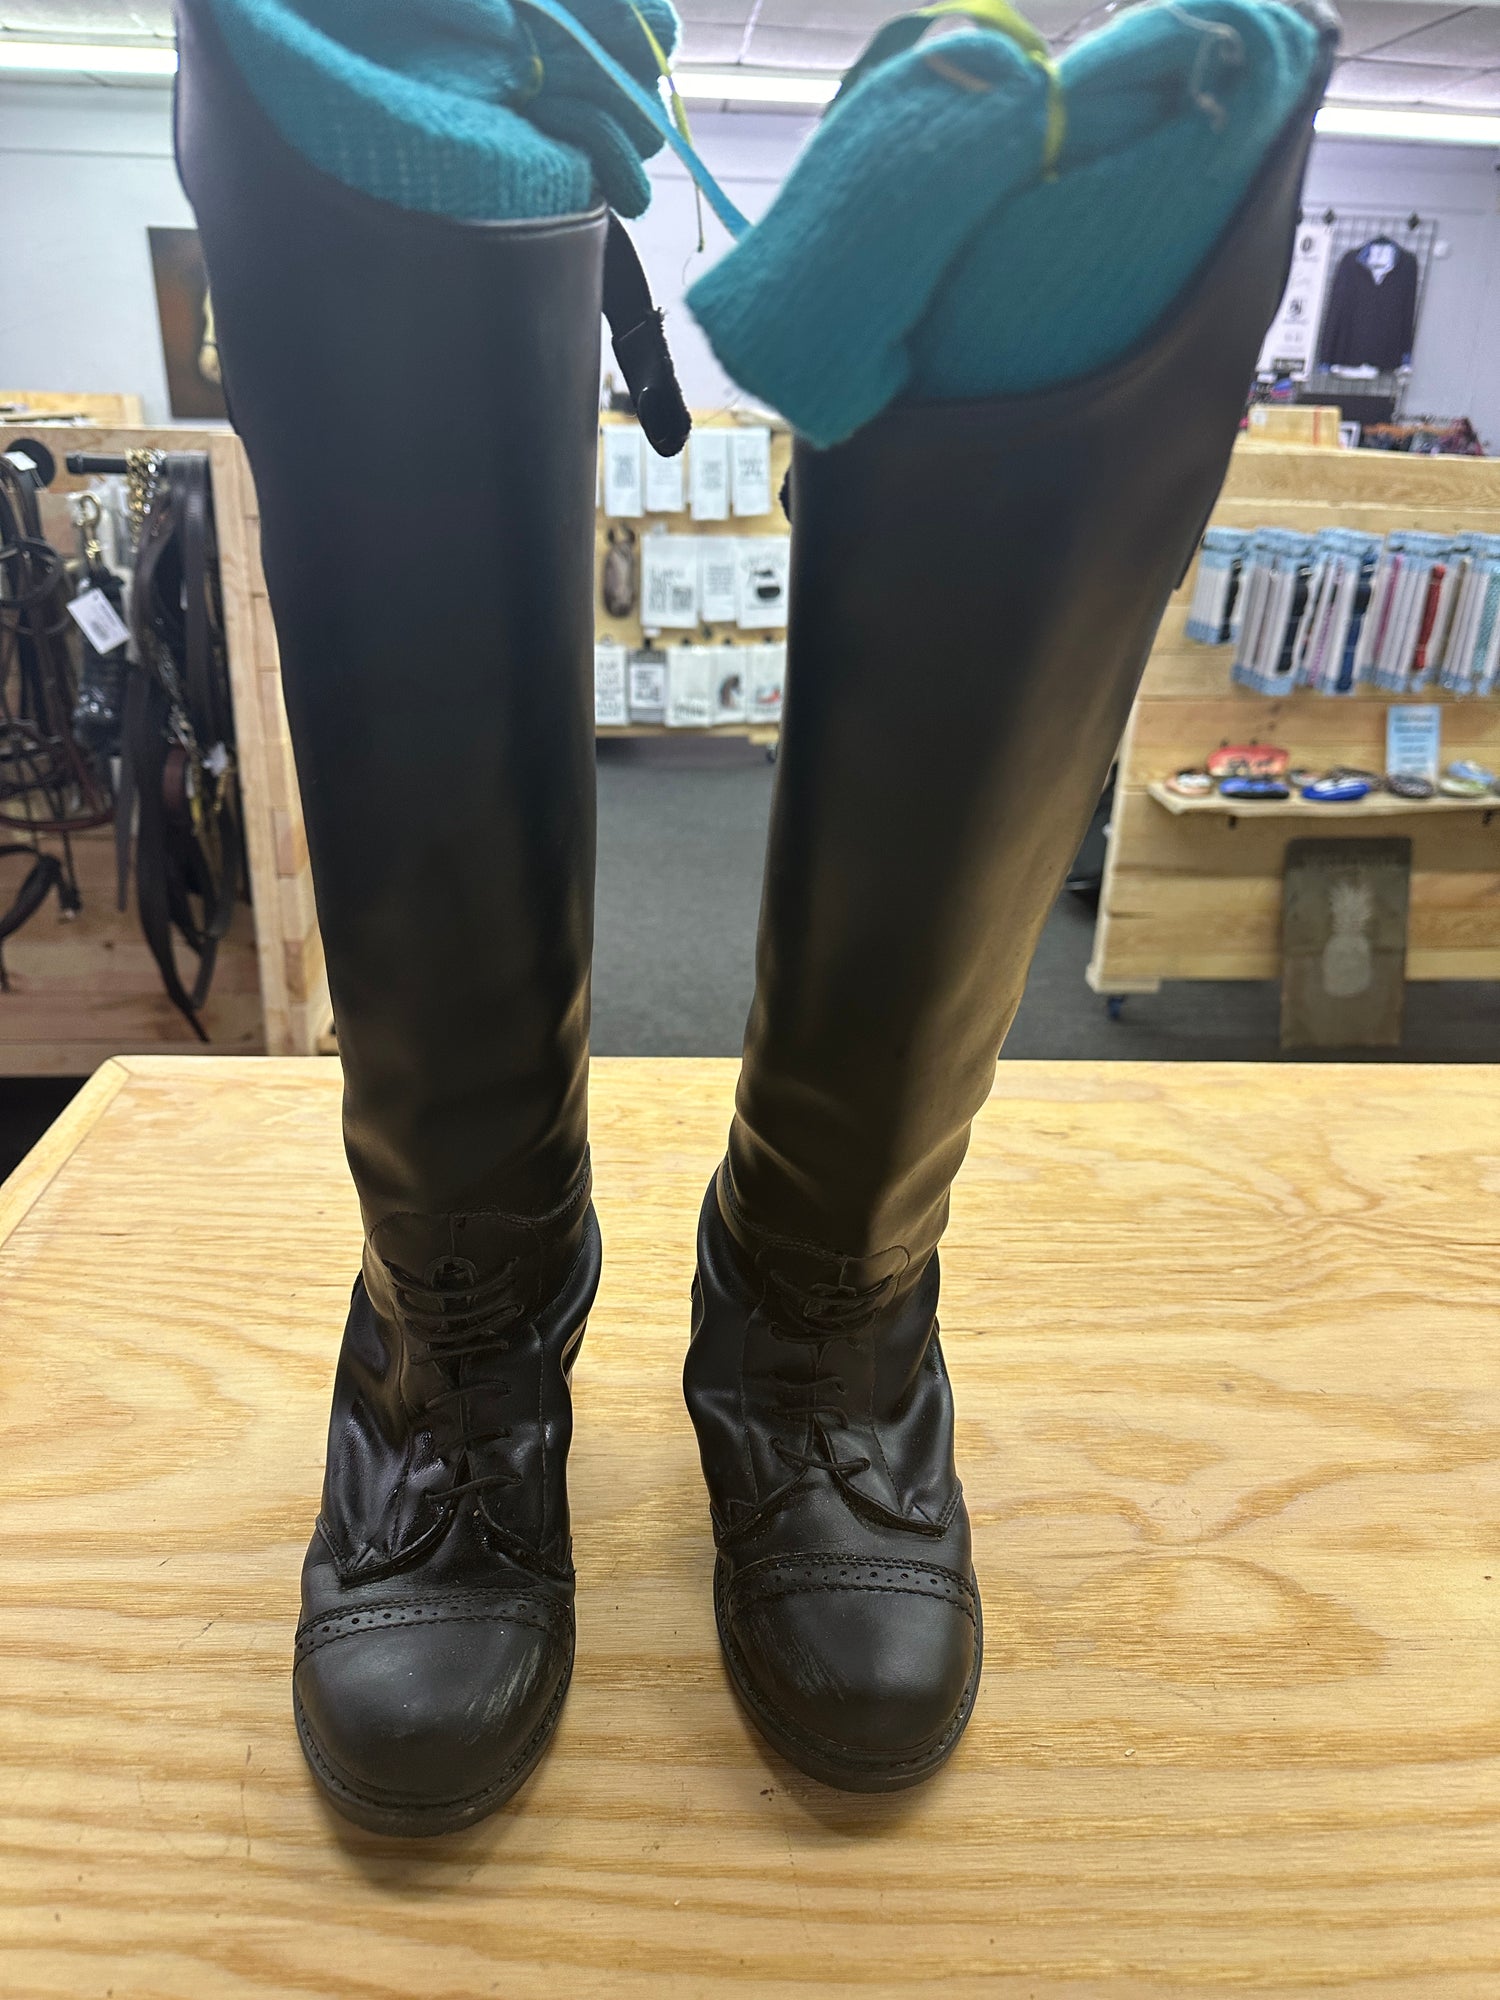 Women's Tall Field Boots Black - Size 6R in good Condition